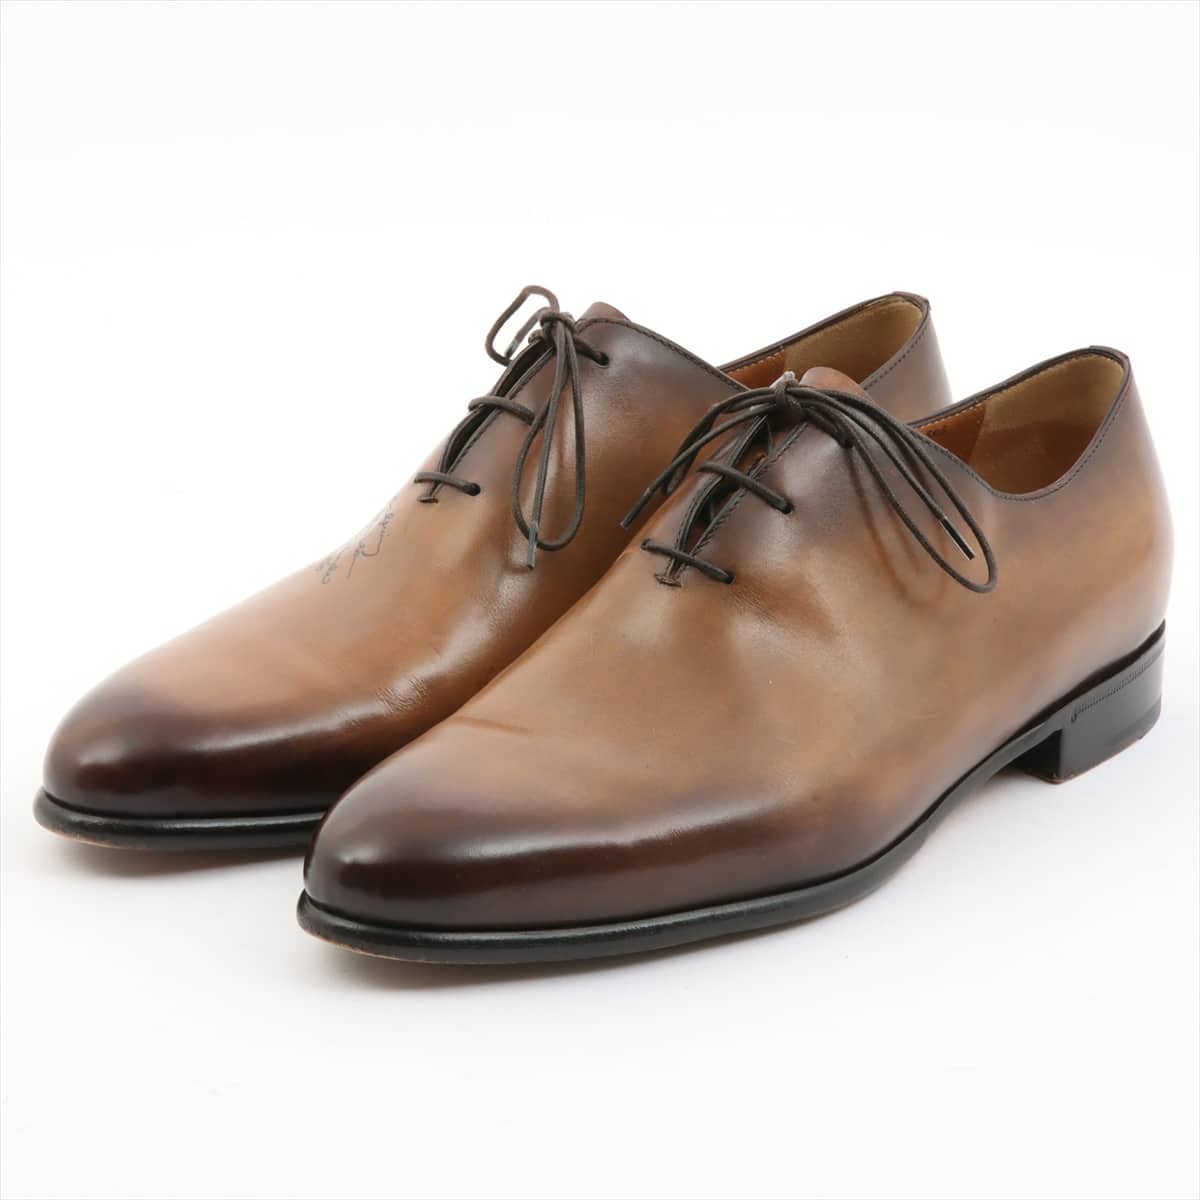 Berluti Calligraphy Leather Leather shoes 6 1/2 Men's Brown Scrit Alessandro Genuine shoe keeper available